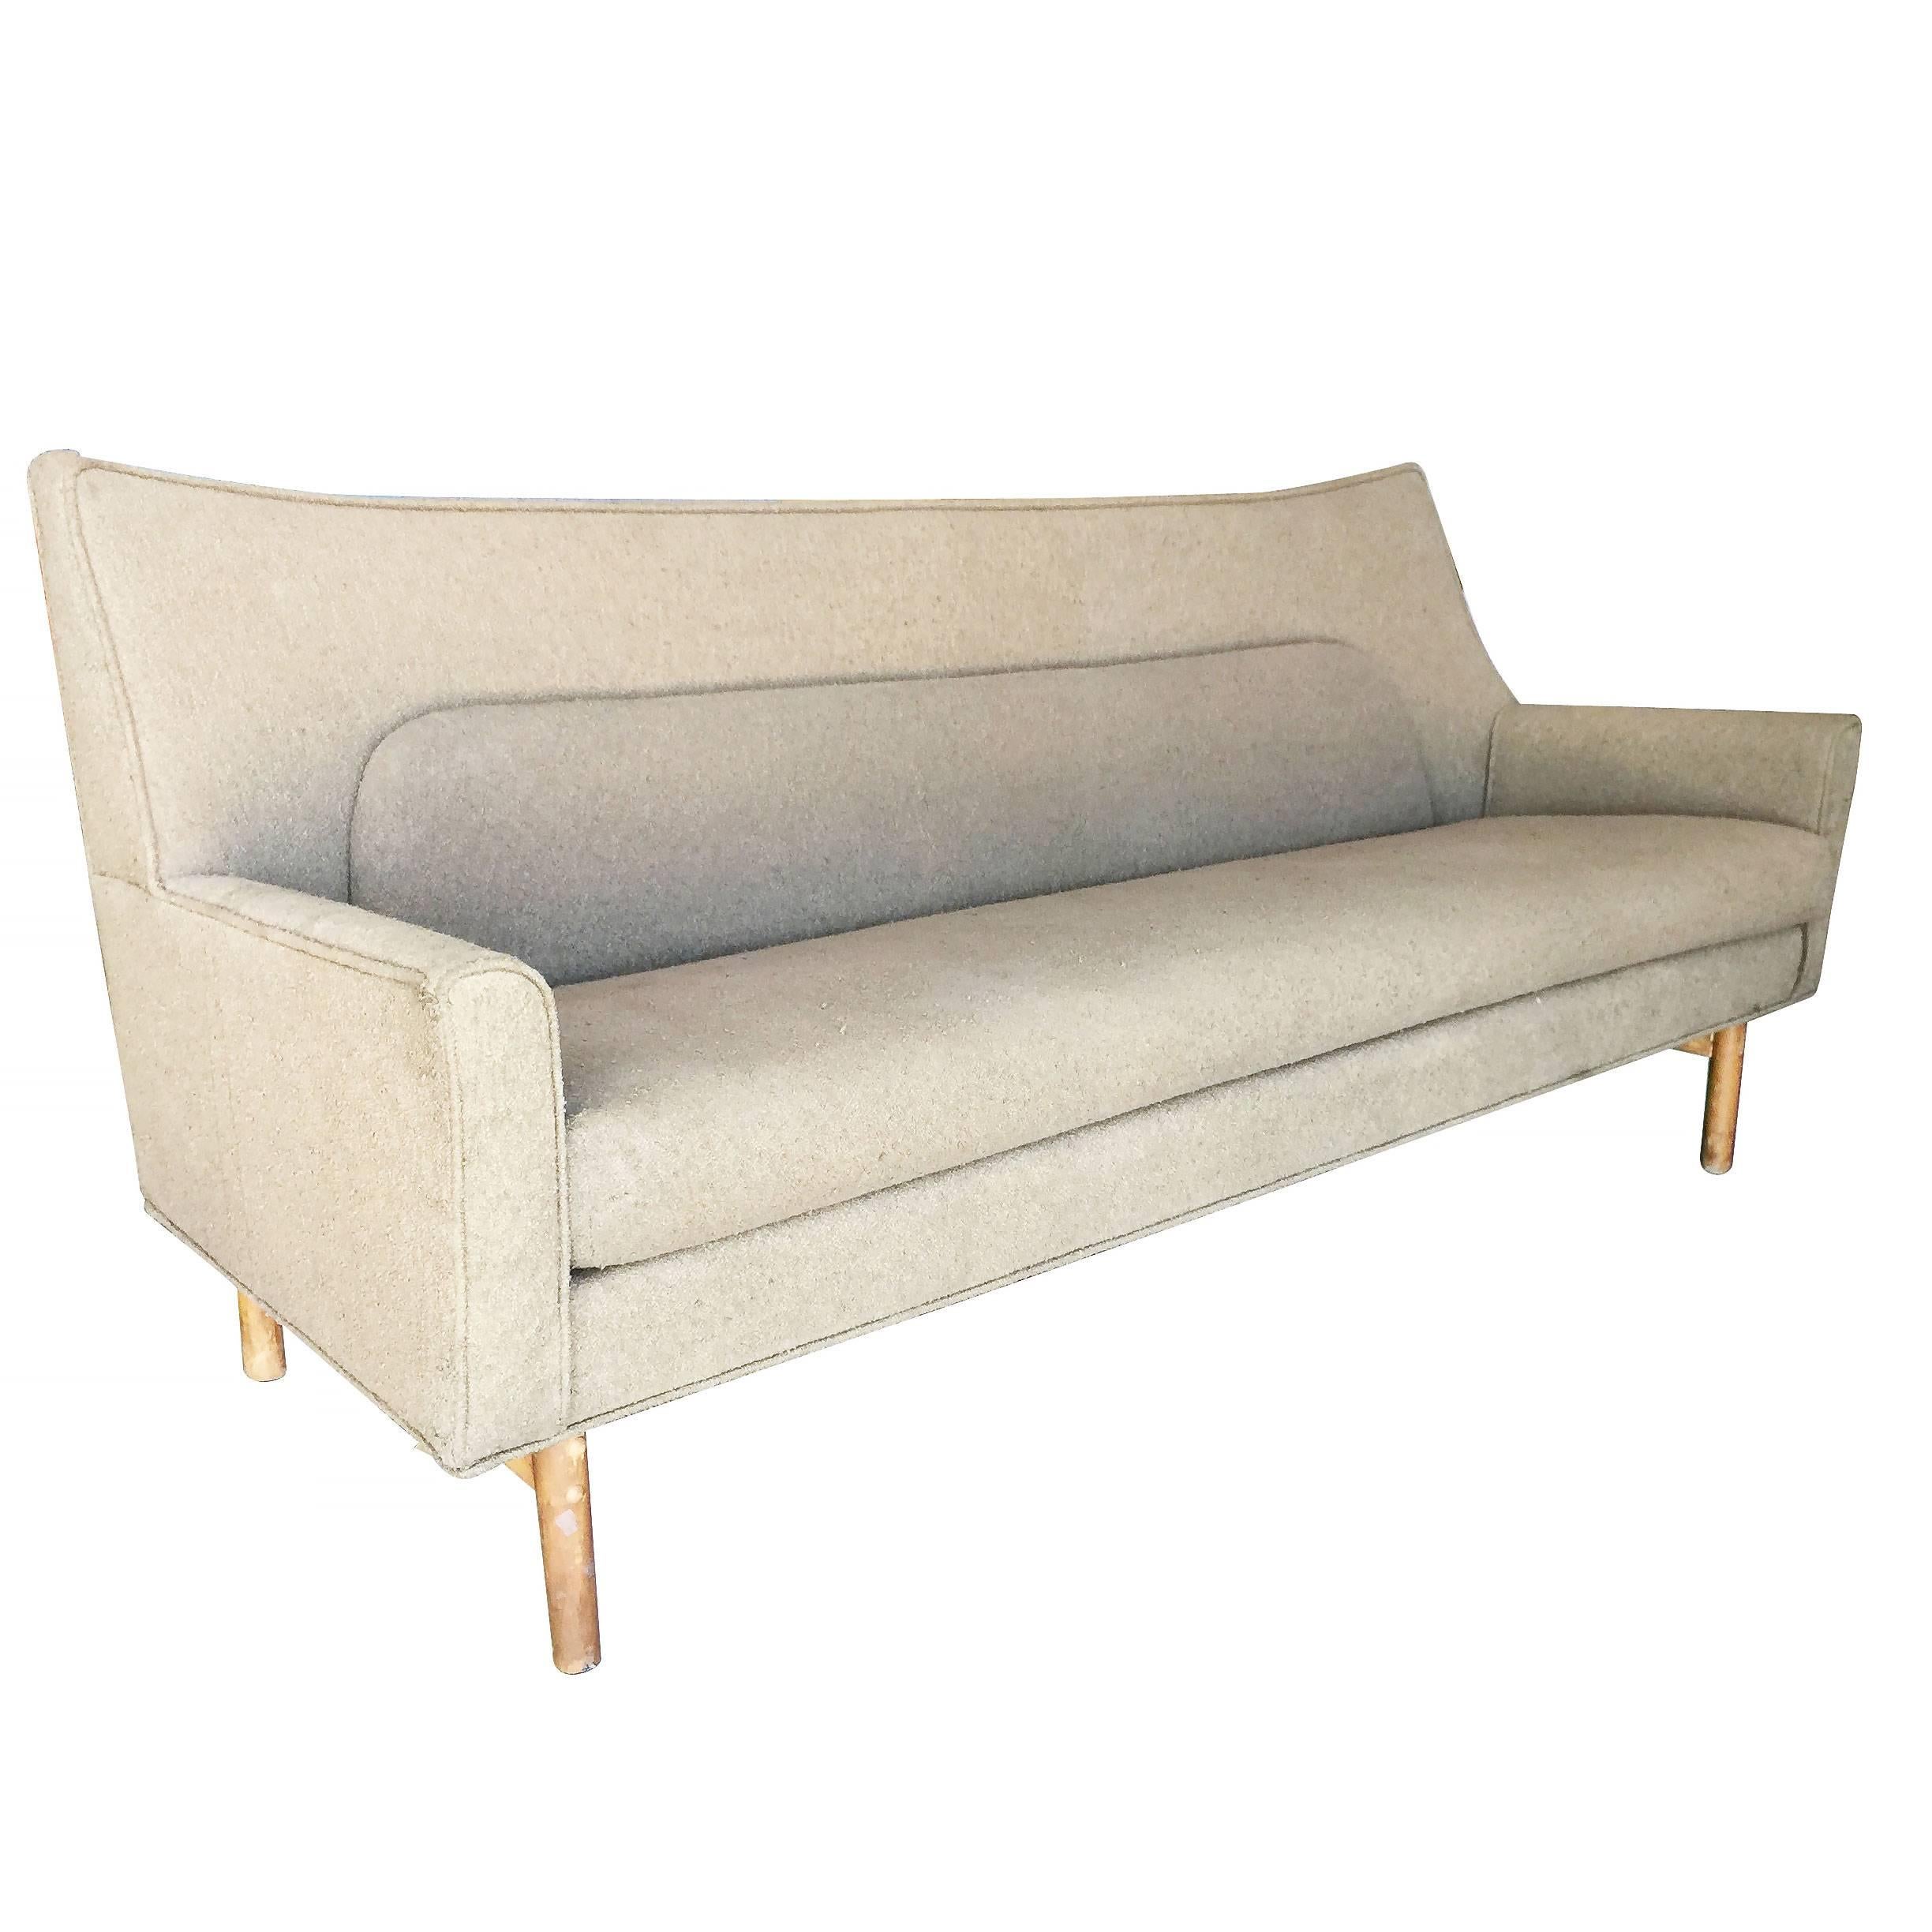 Vintage Arched sofa fashioned after the iconic 